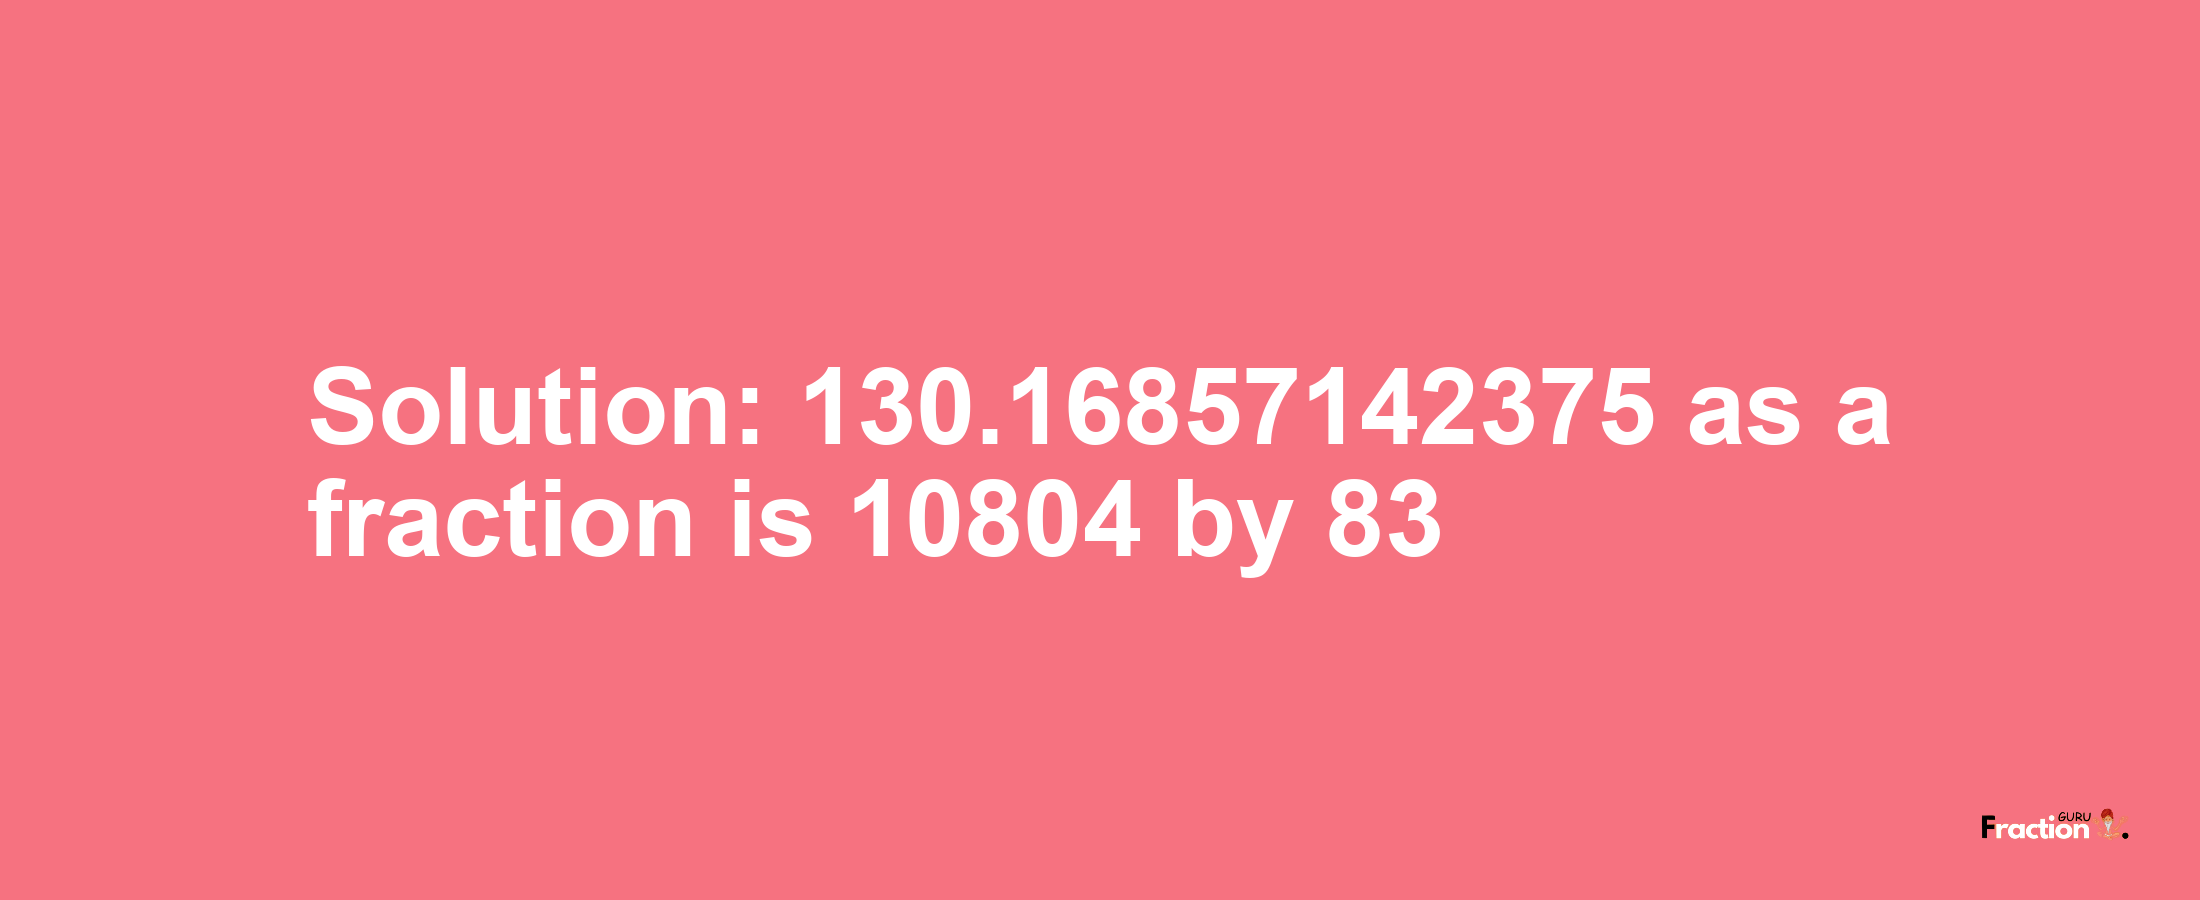 Solution:130.16857142375 as a fraction is 10804/83